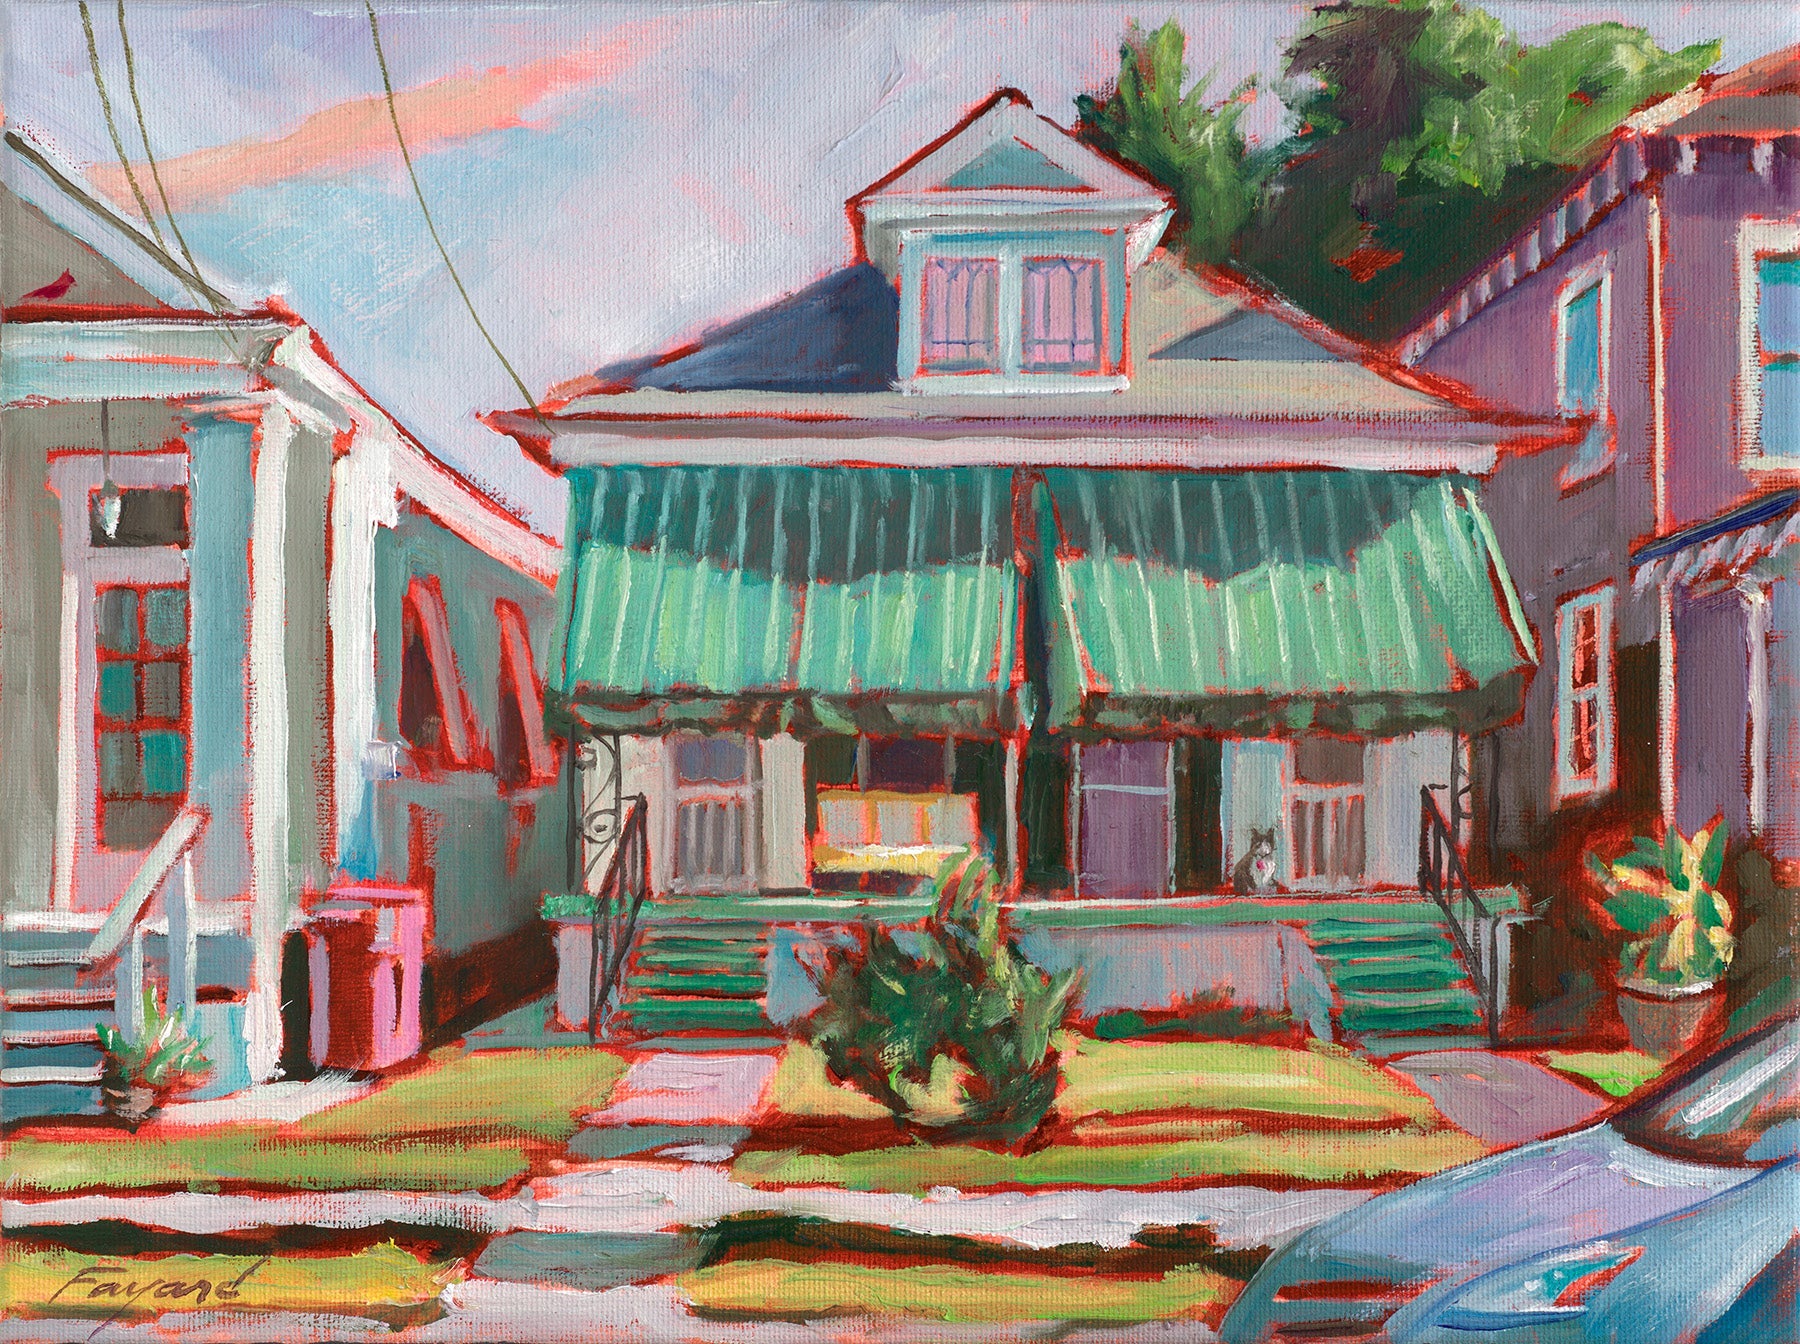 Doubly Cool in MidCity, New Orleans, oil on canvas, 9" x 12" - PaulFayard